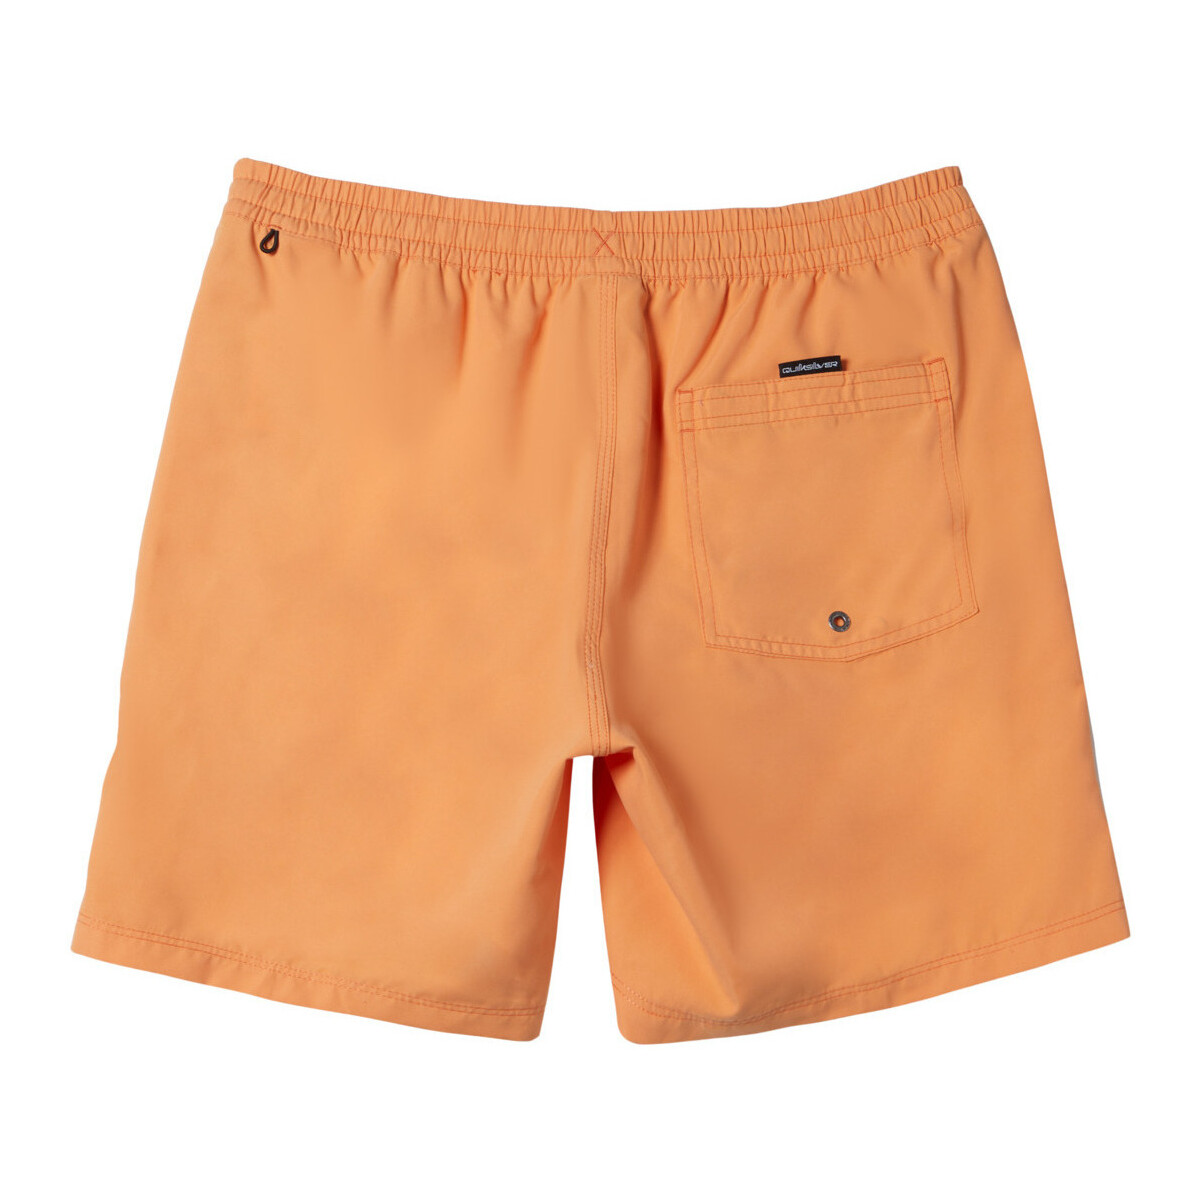 Quiksilver Orange Everyday Solid Volley Jpaa3gjy